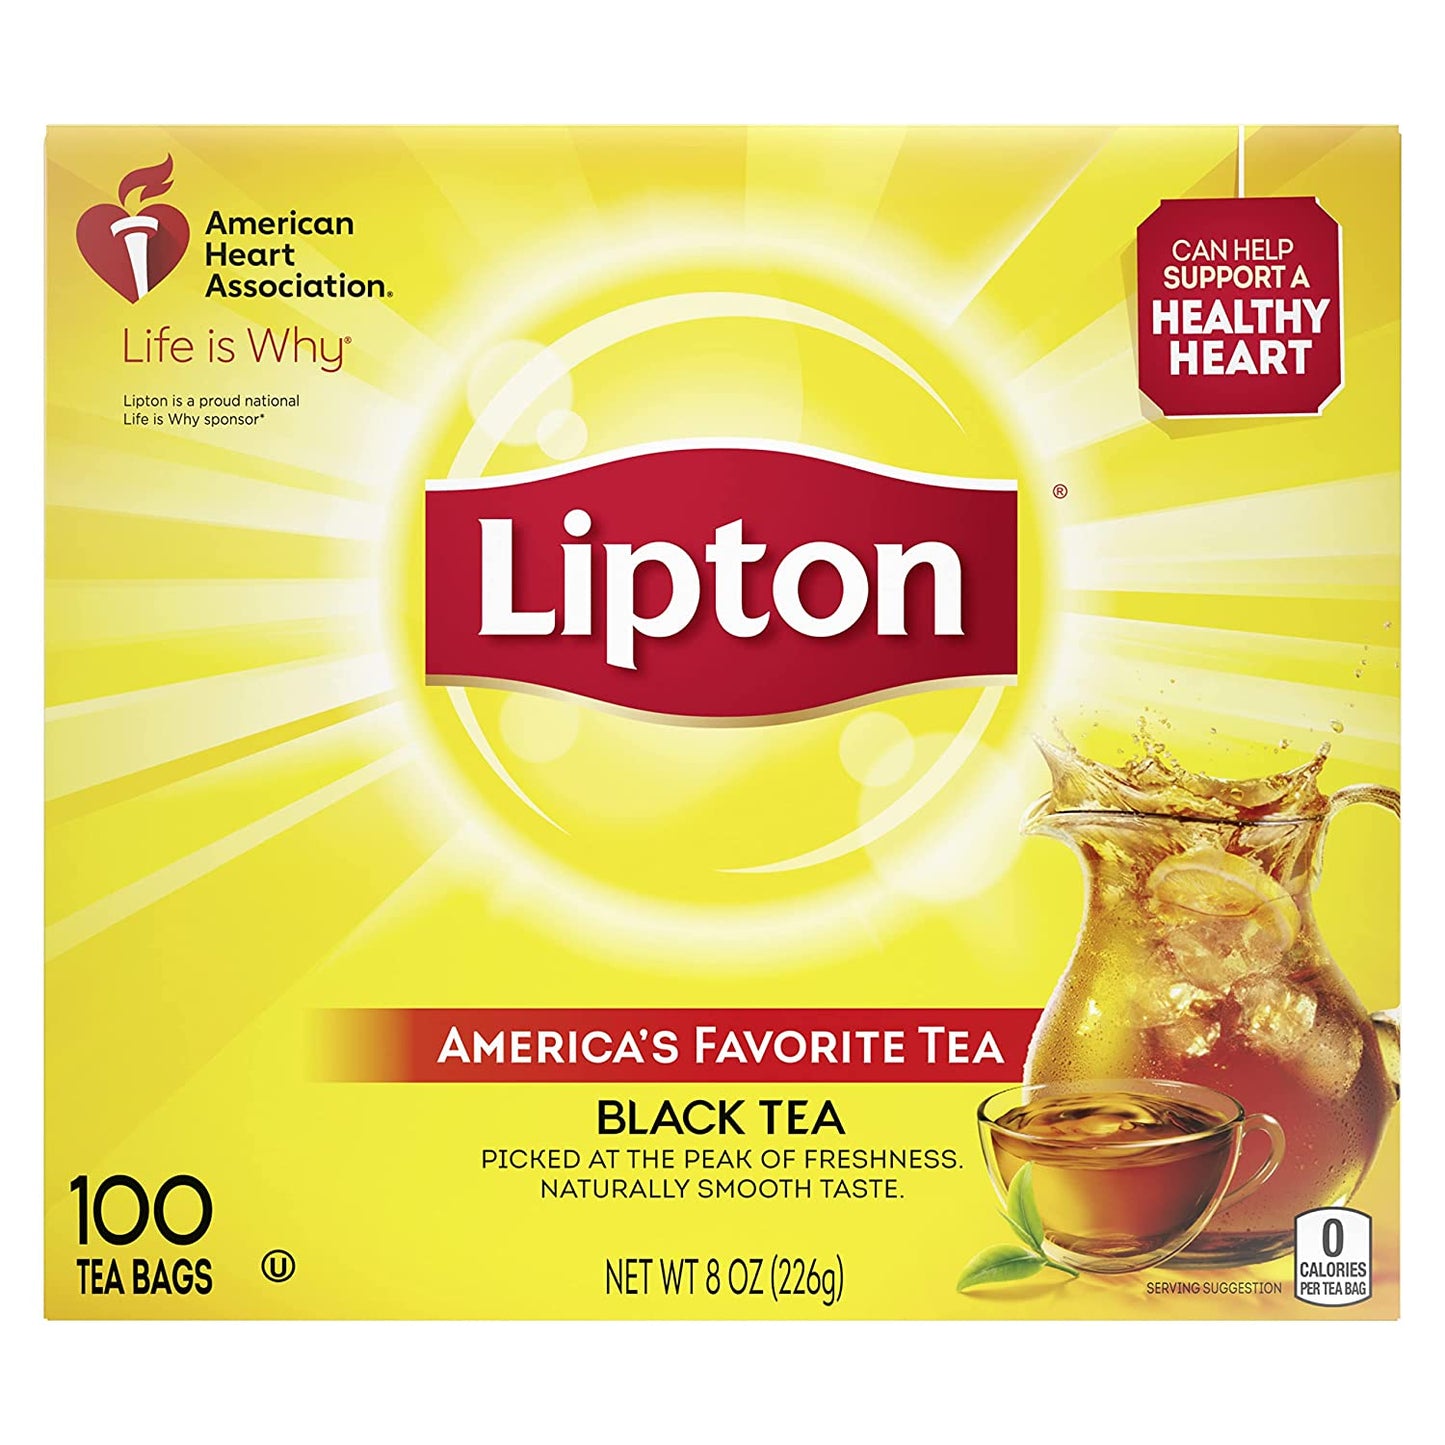 Lipton Tea Bags For A Naturally Smooth Taste Black Tea Can Help Support a Healthy Heart 8 oz 100 Count, Pack of 6